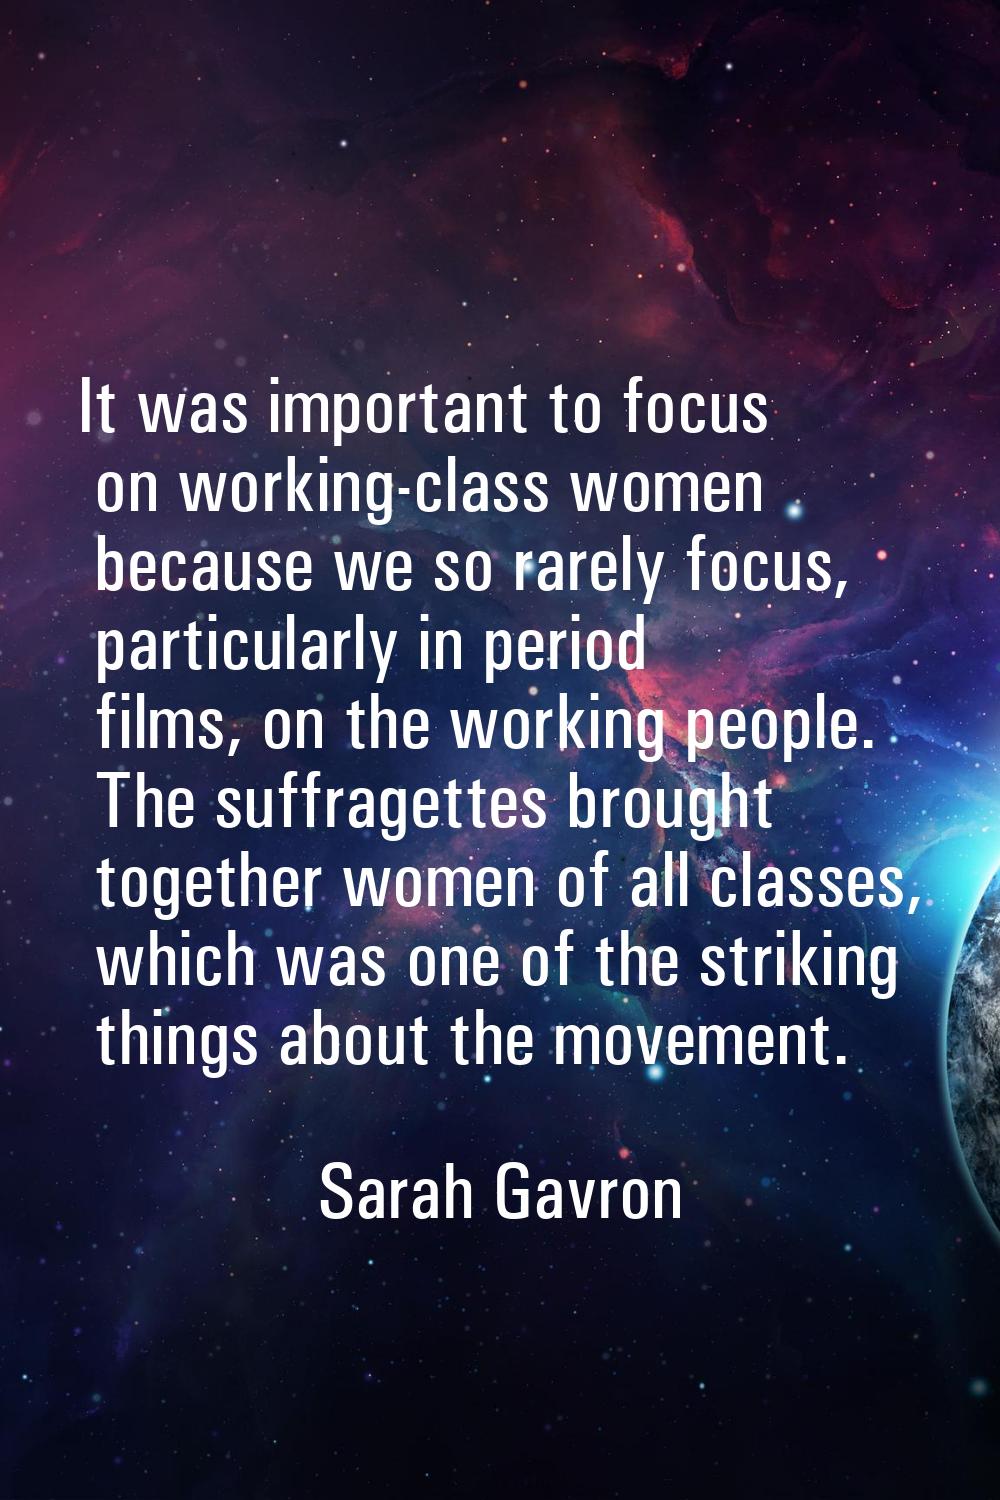 It was important to focus on working-class women because we so rarely focus, particularly in period